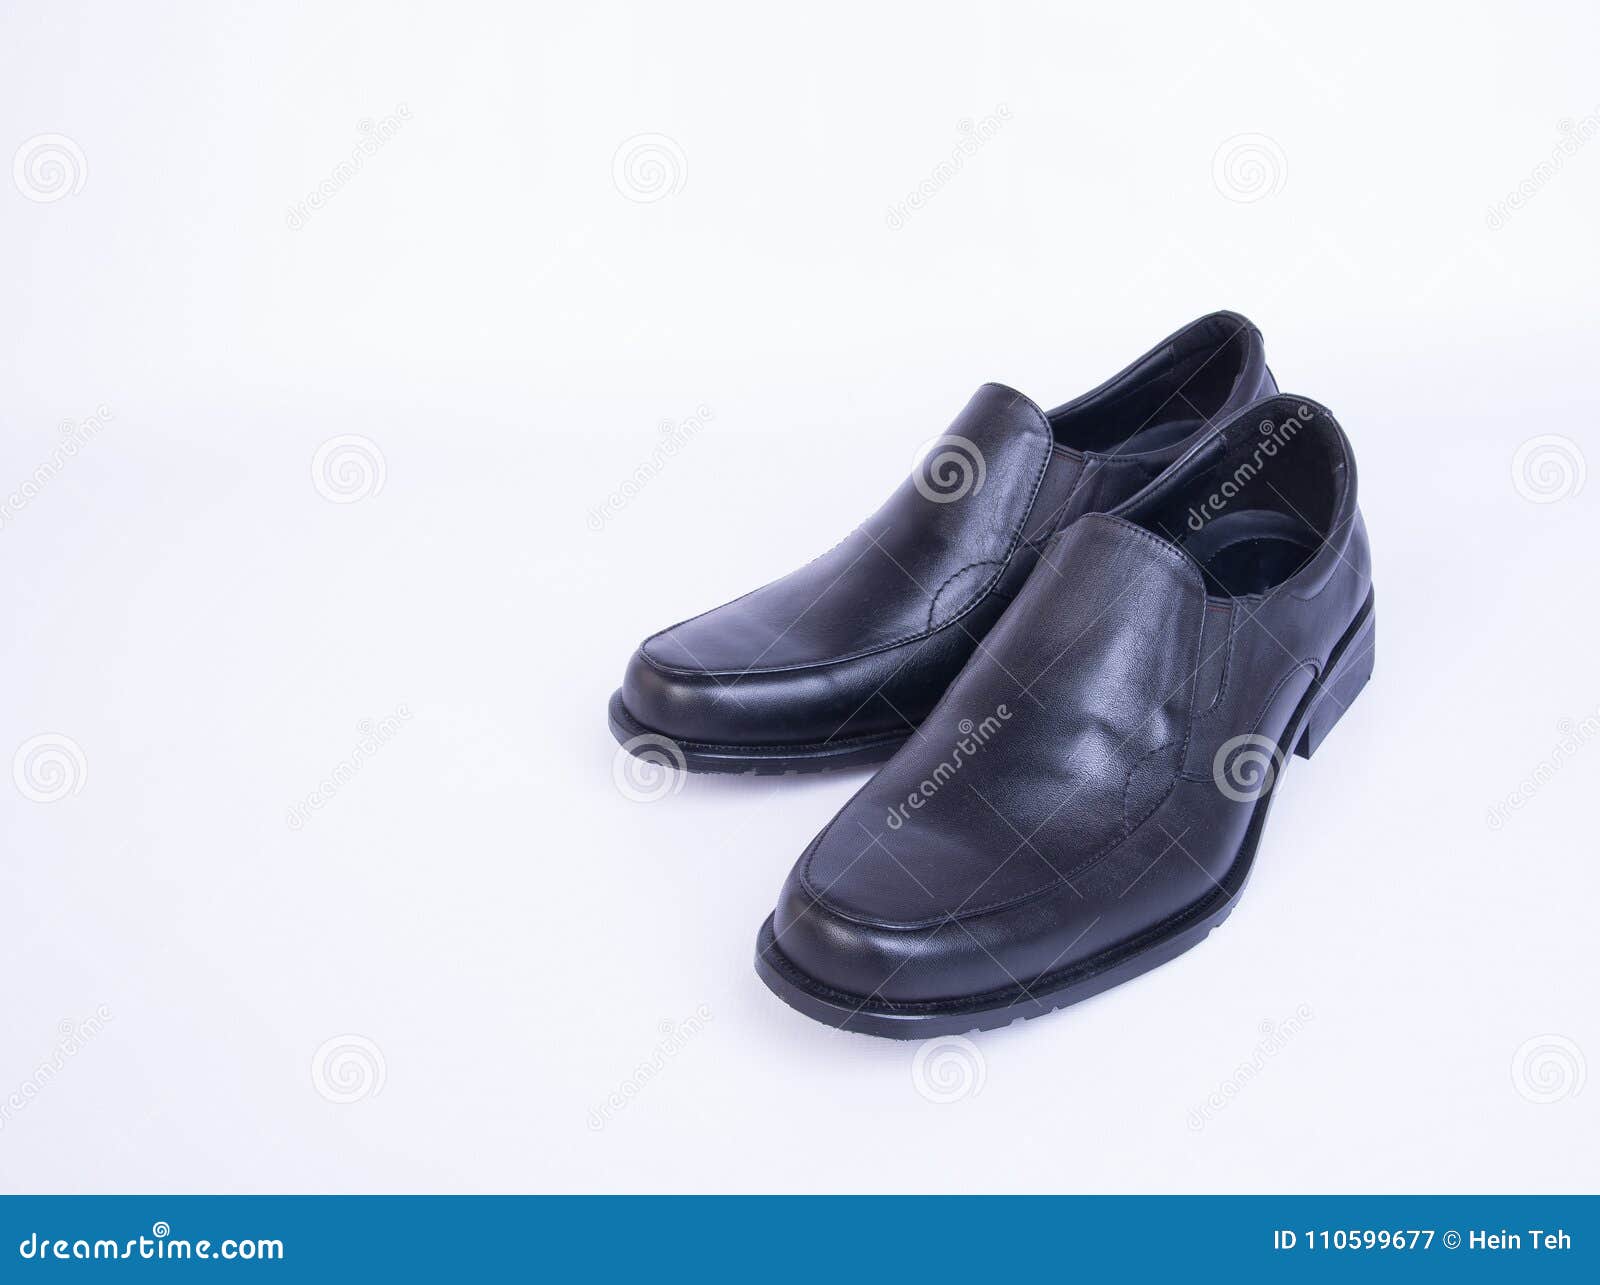 Shoe or Black Color Men S Shoes on a Background. Stock Image - Image of ...